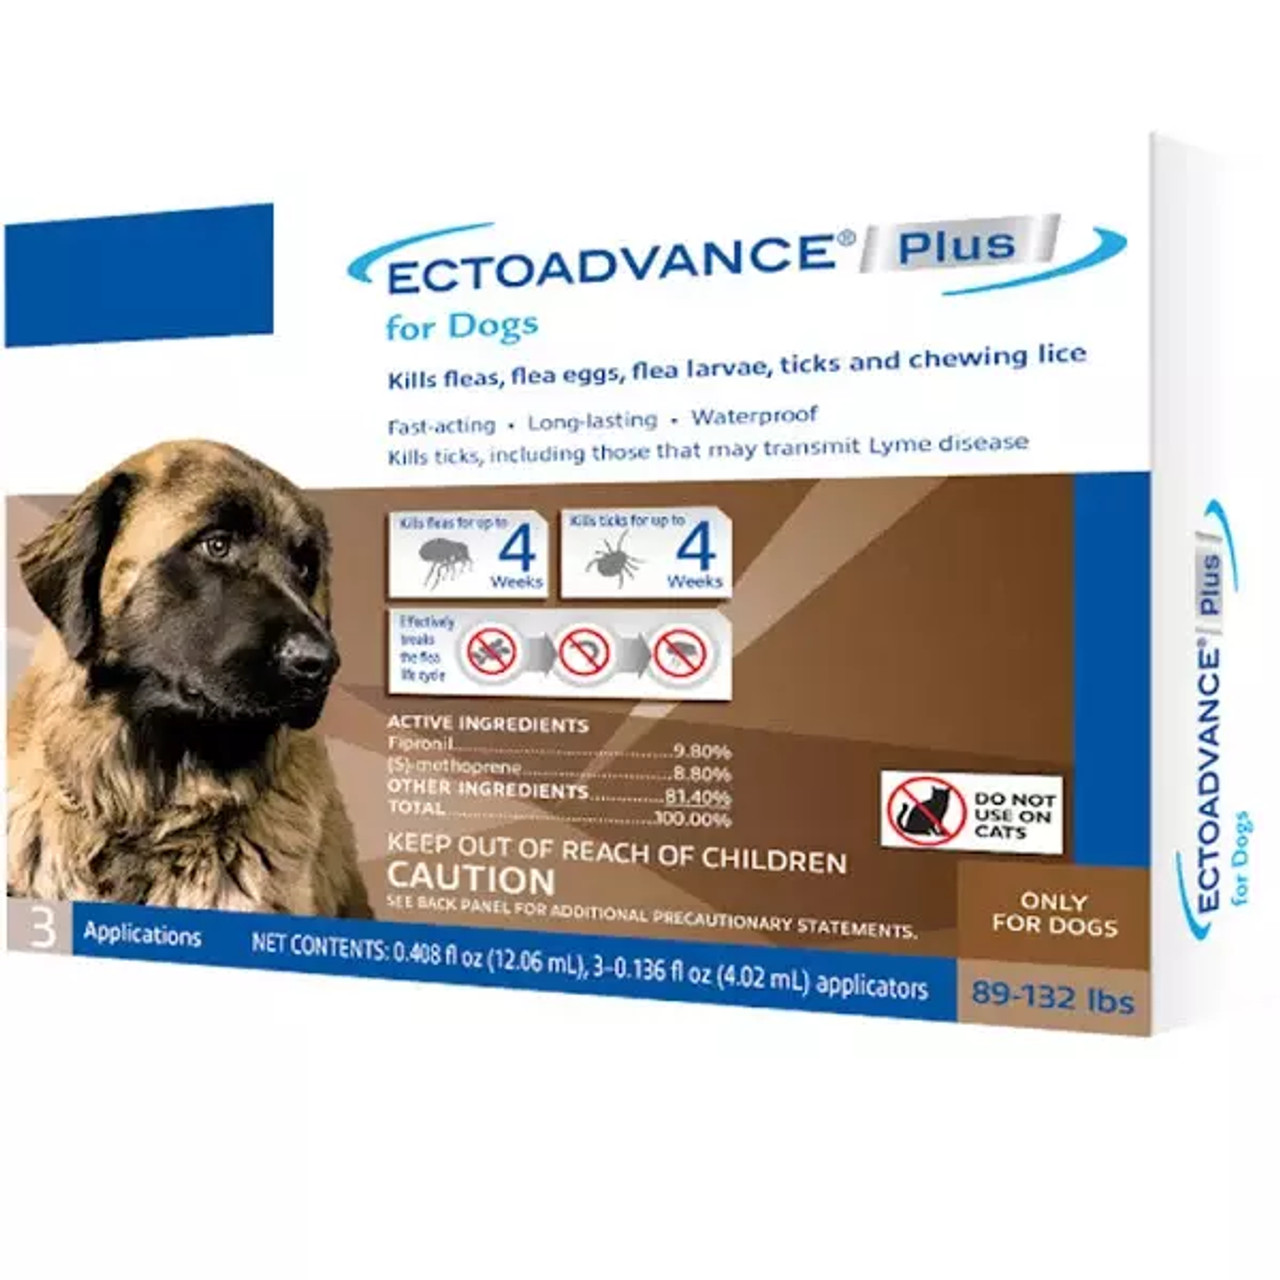 EctoAdvance Plus for Dogs